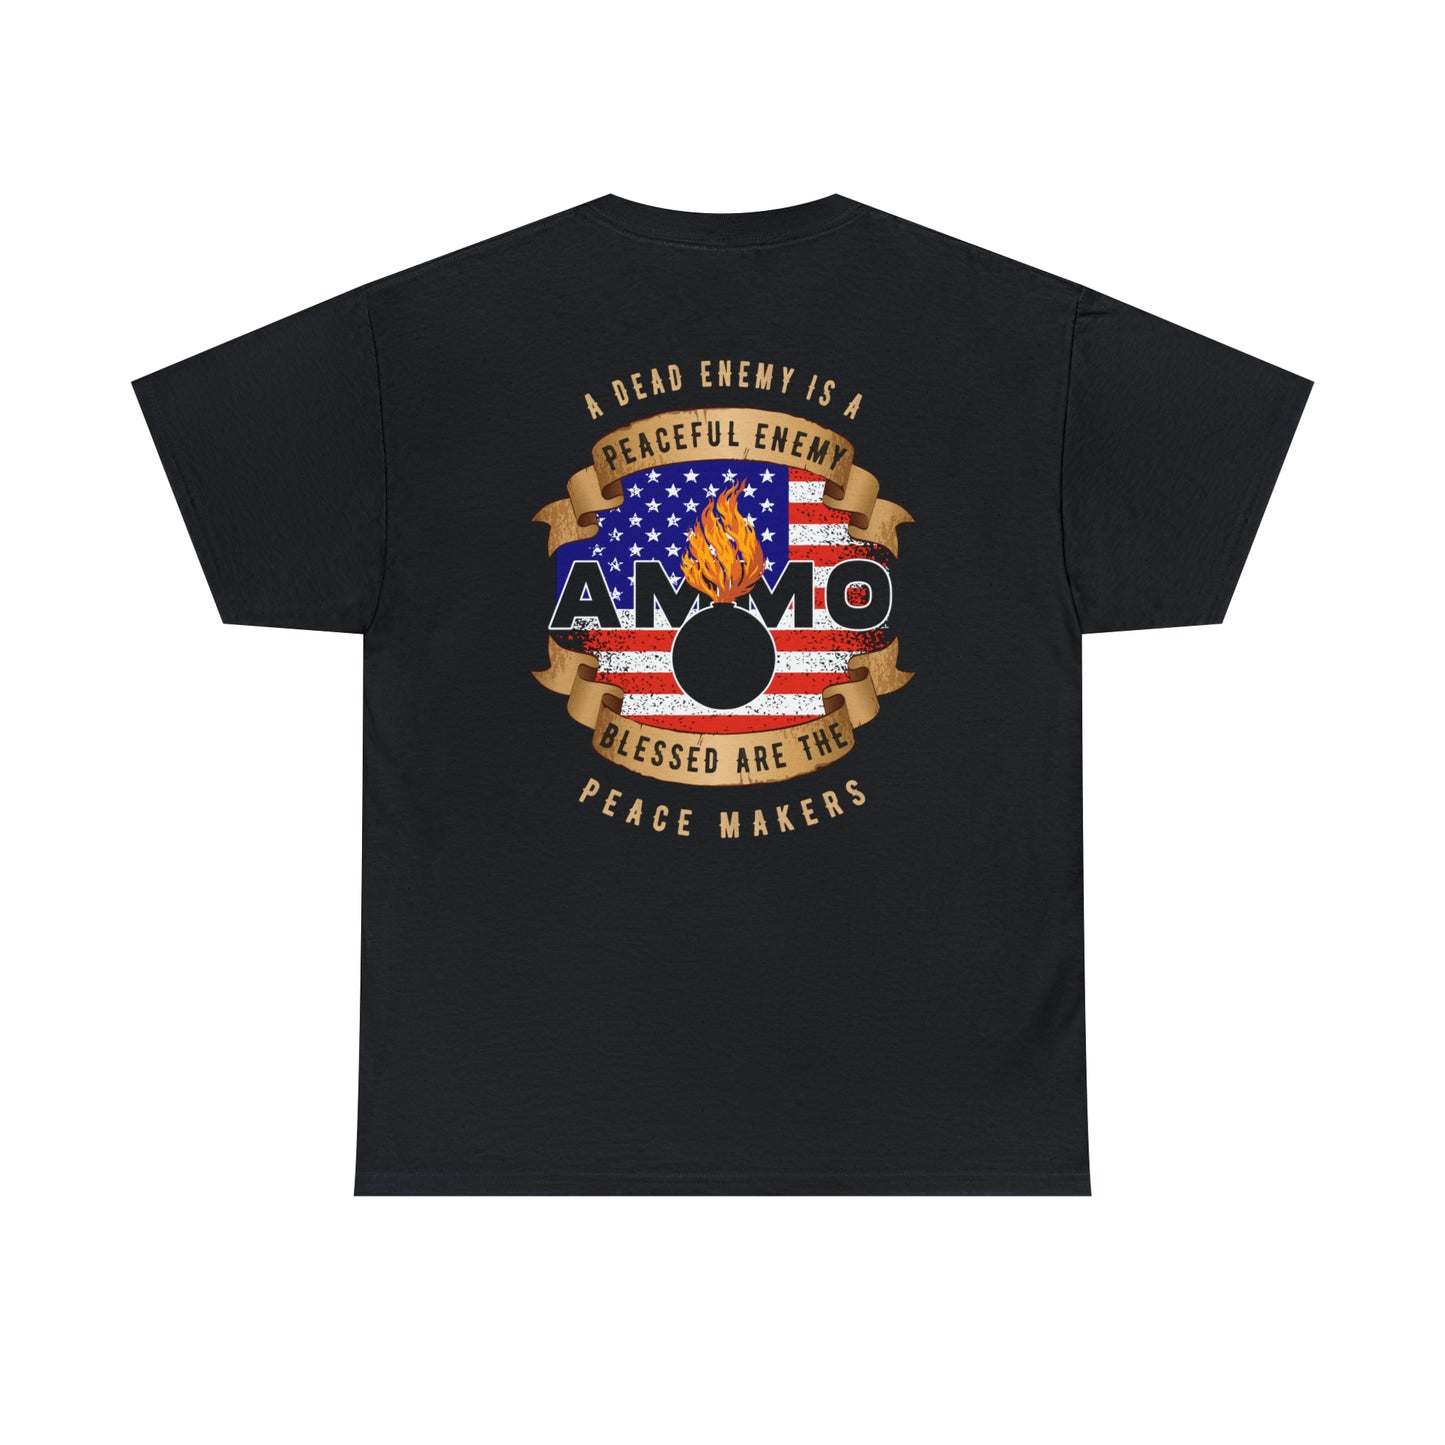 USAF AMMO A Dead Enemy Is A Peaceful Enemy Blessed Are The Peace Makers Pisspot Unisex Heavy Cotton Tee